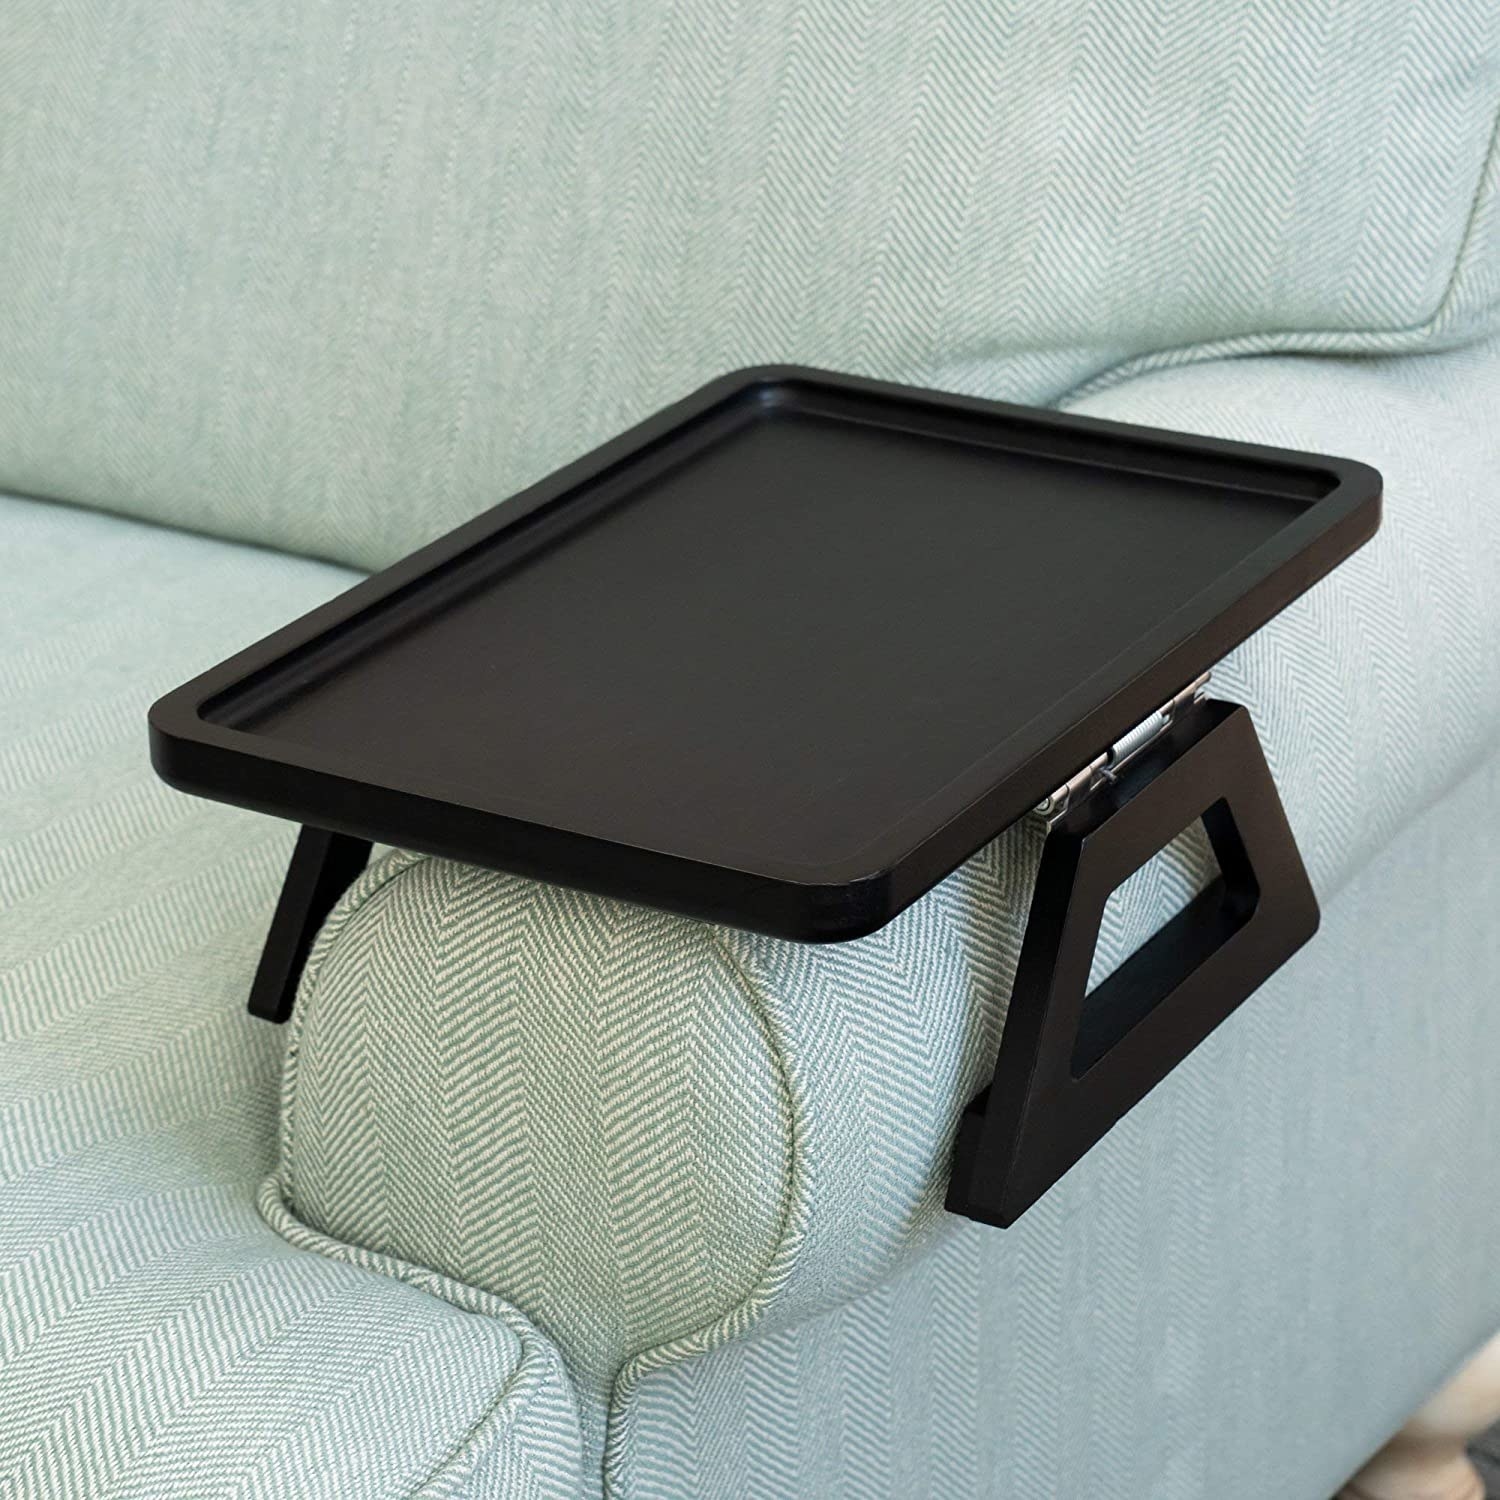 The tray on the arm of a couch in a living room